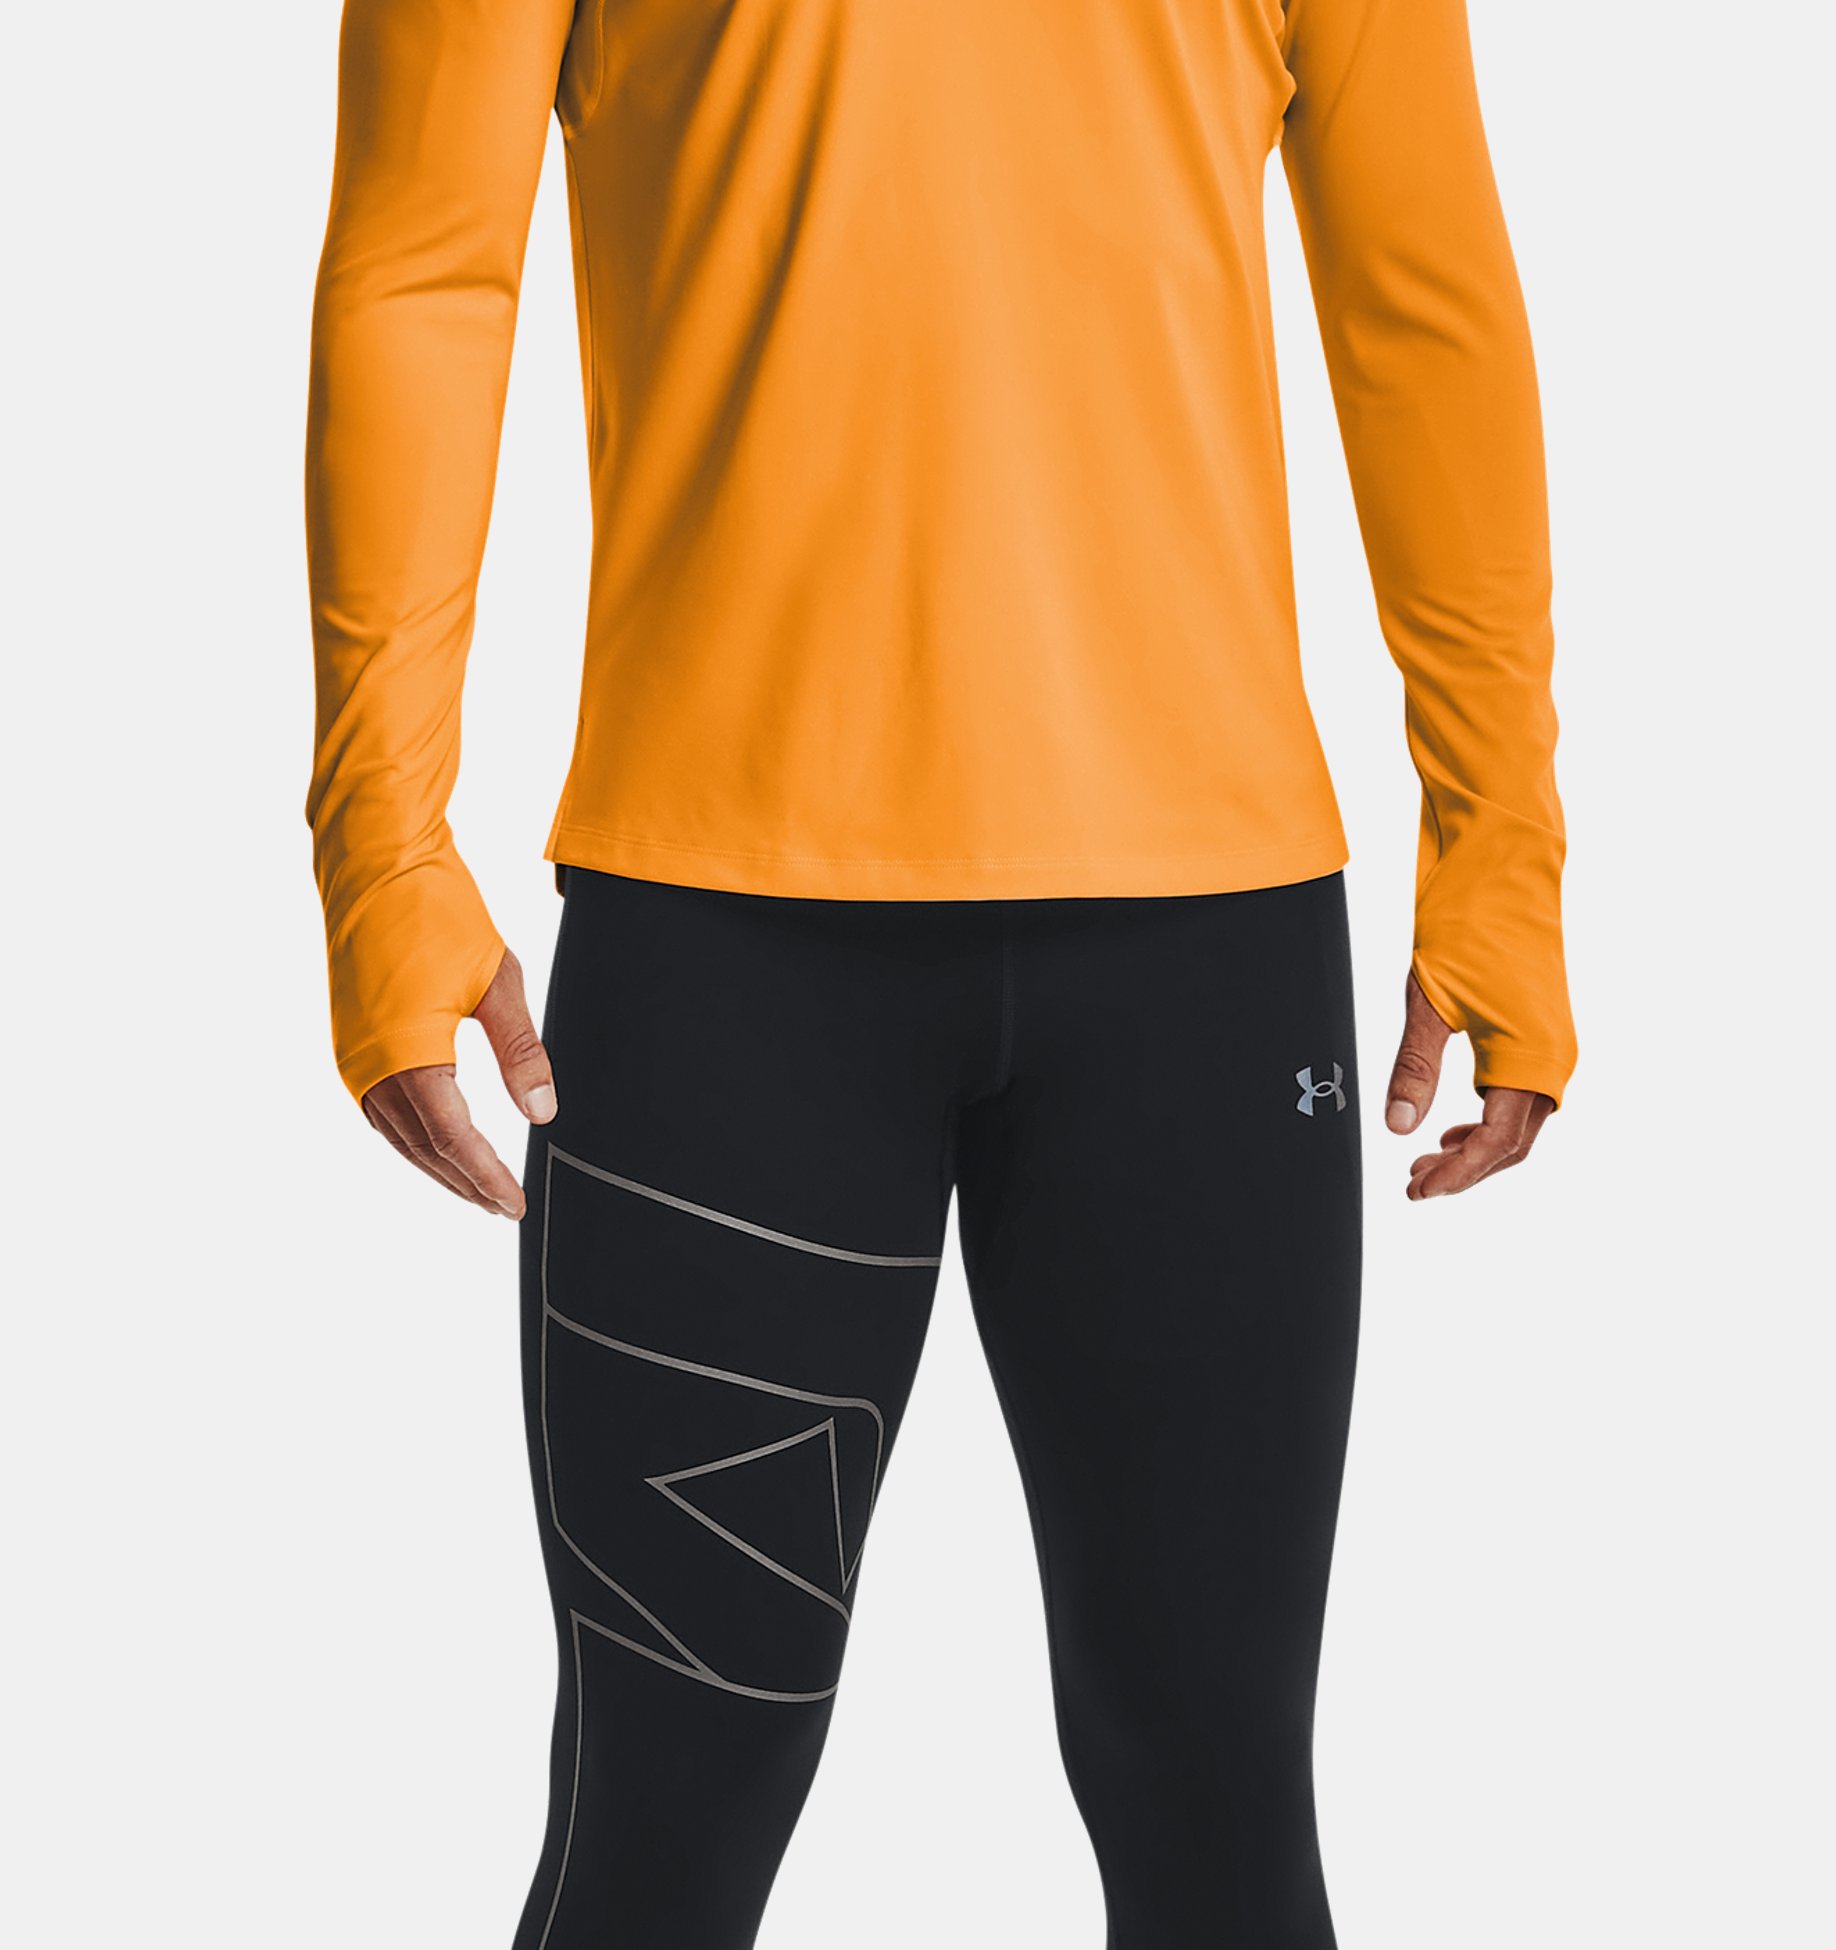 https://underarmour.scene7.com/is/image/Underarmour/V5-1356148-857_FSF?rp=standard-0pad|pdpZoomDesktop&scl=0.72&fmt=jpg&qlt=85&resMode=sharp2&cache=on,on&bgc=f0f0f0&wid=1836&hei=1950&size=1500,1500